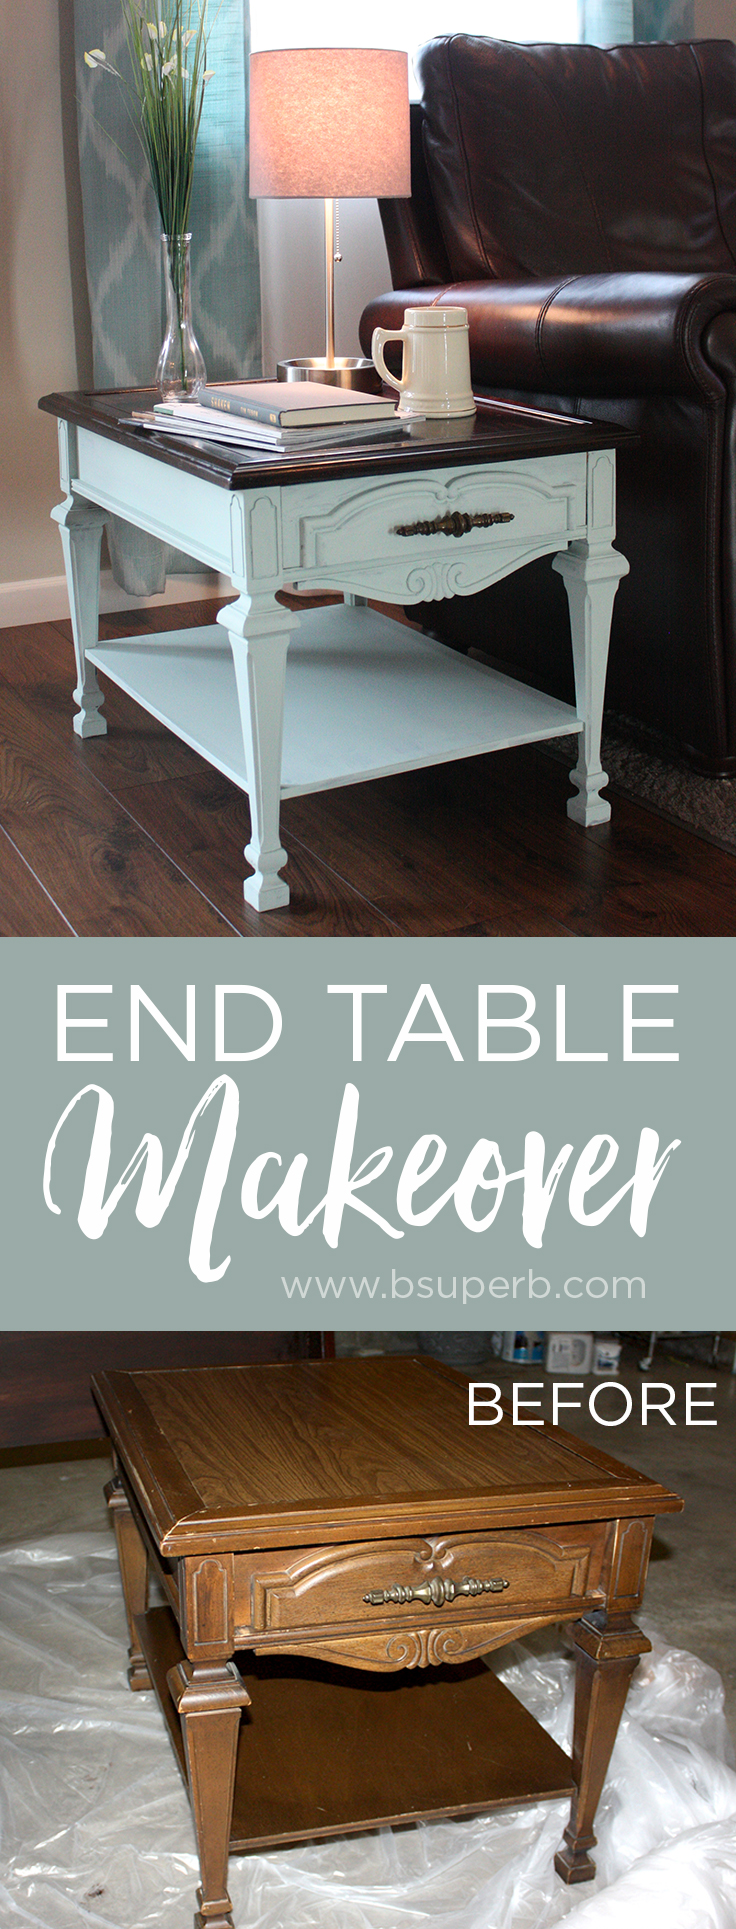 End Table Makeover with Chalk Paint — Aratari At Home